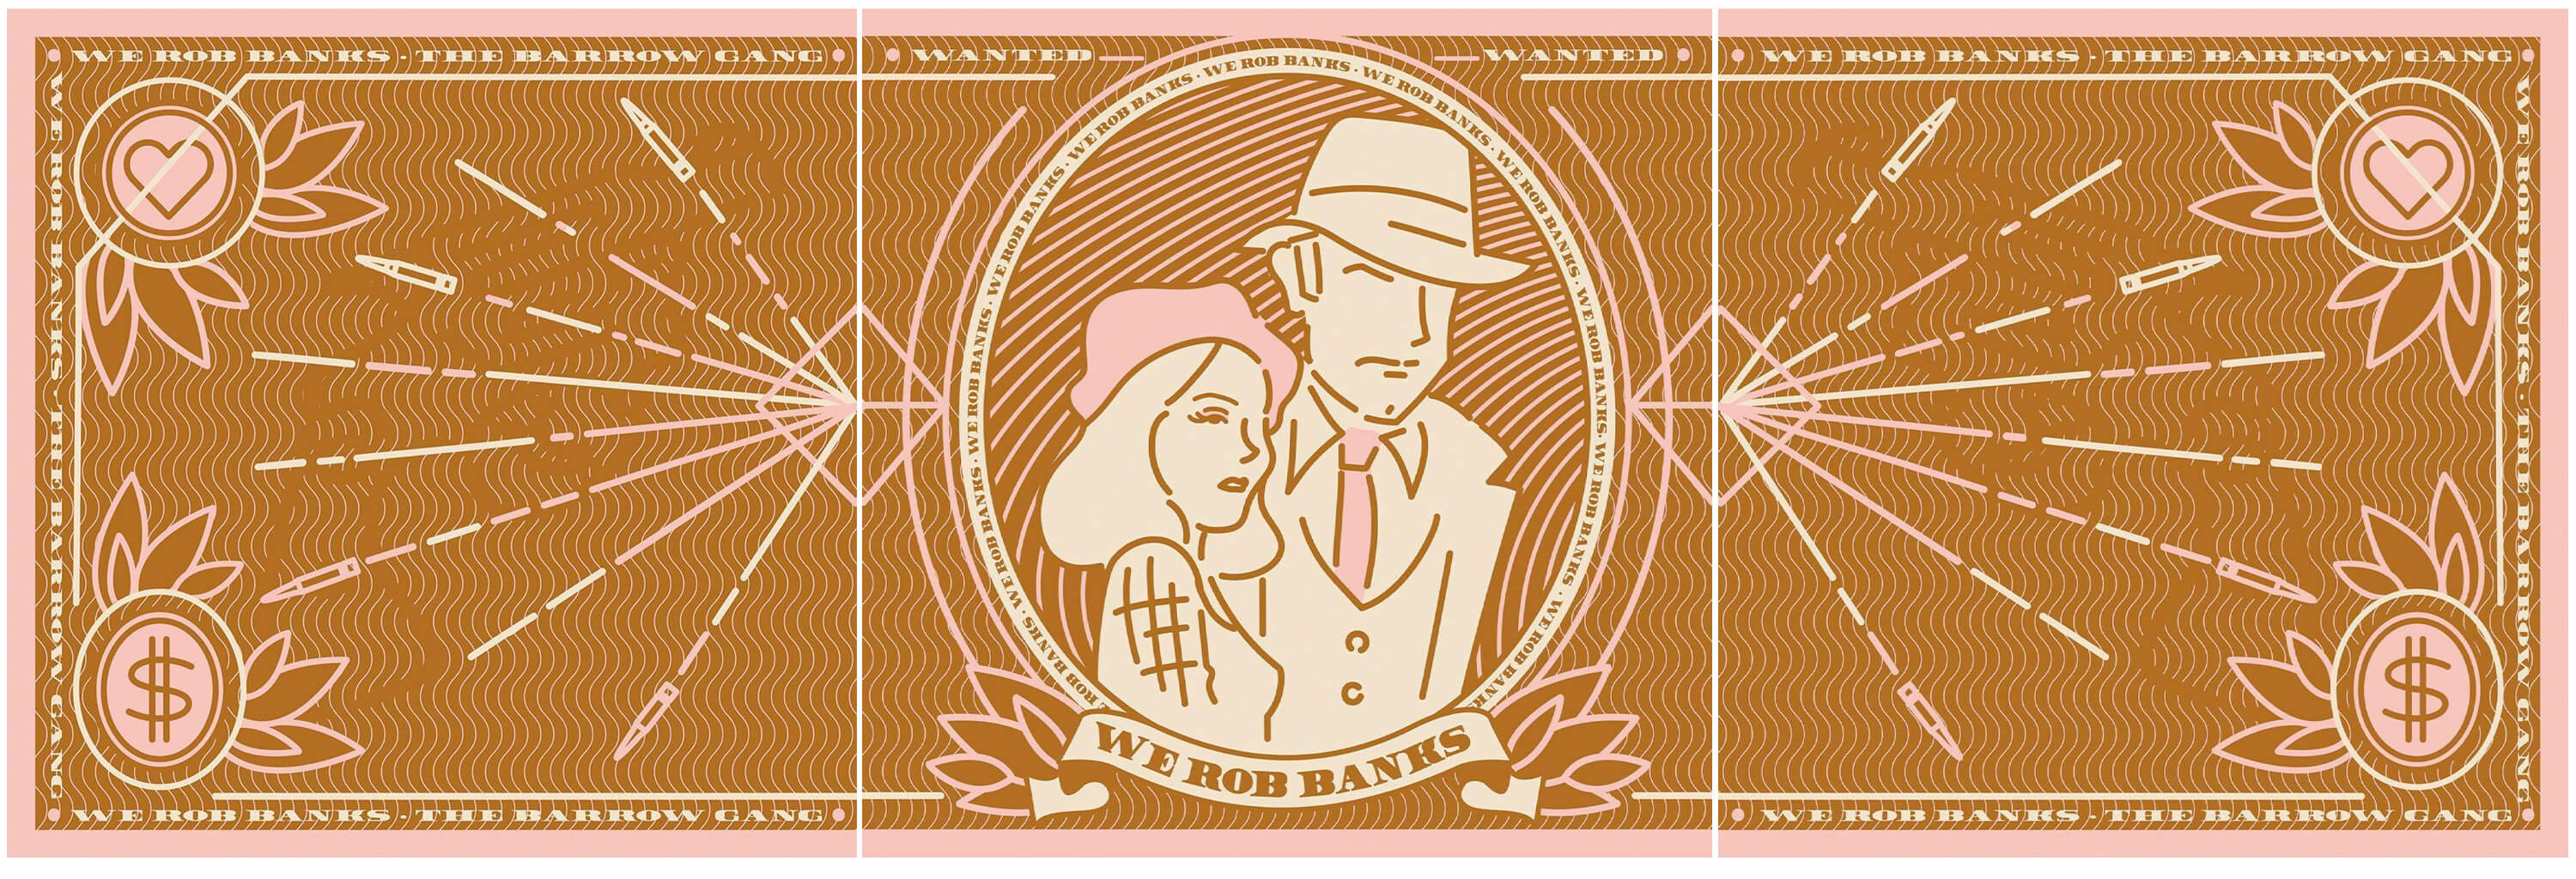 Jacober Creative IRL In Reel Life Bonnie & Clyde Illustration